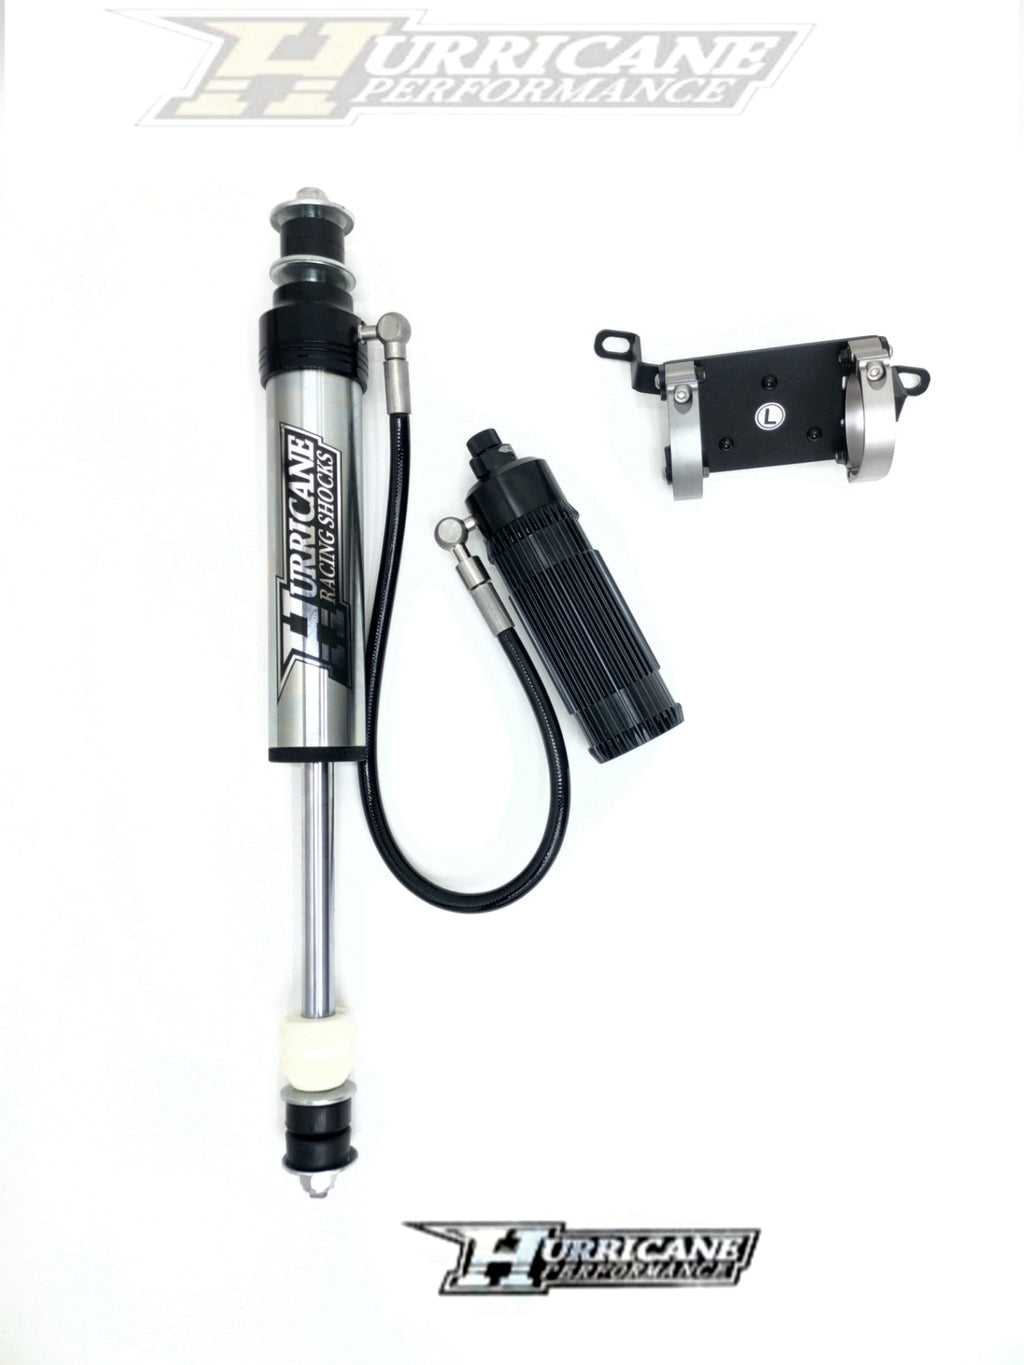 Hurricane Performance  Extreme Series 2.5" Shocks, With Reservoir, Double Adjustable, for Nissan Patrol Y60 & Y61